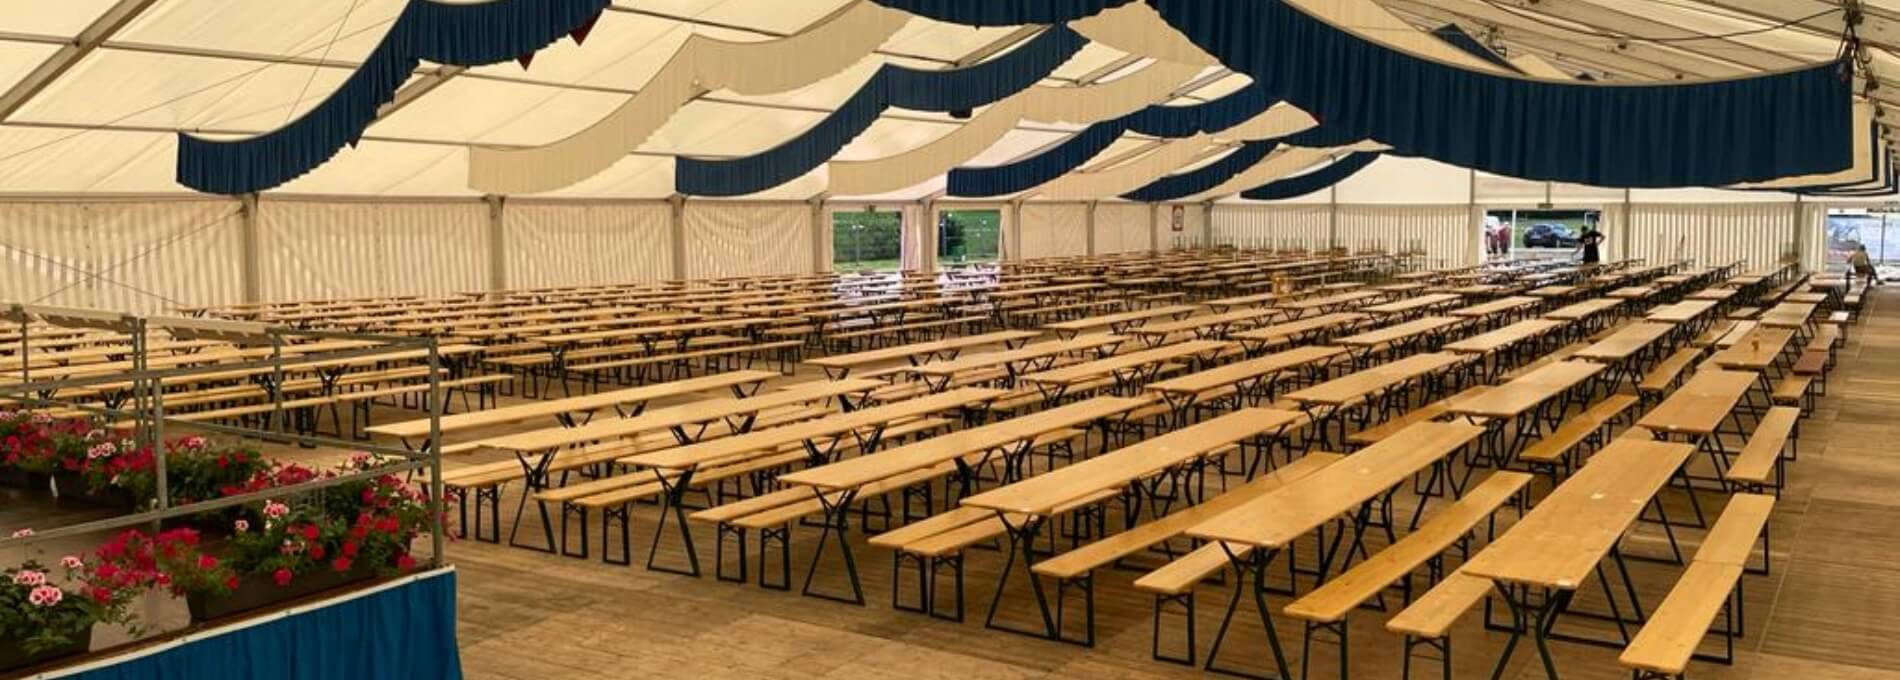 Beer garden table sets with legroom are placed in a marquee.